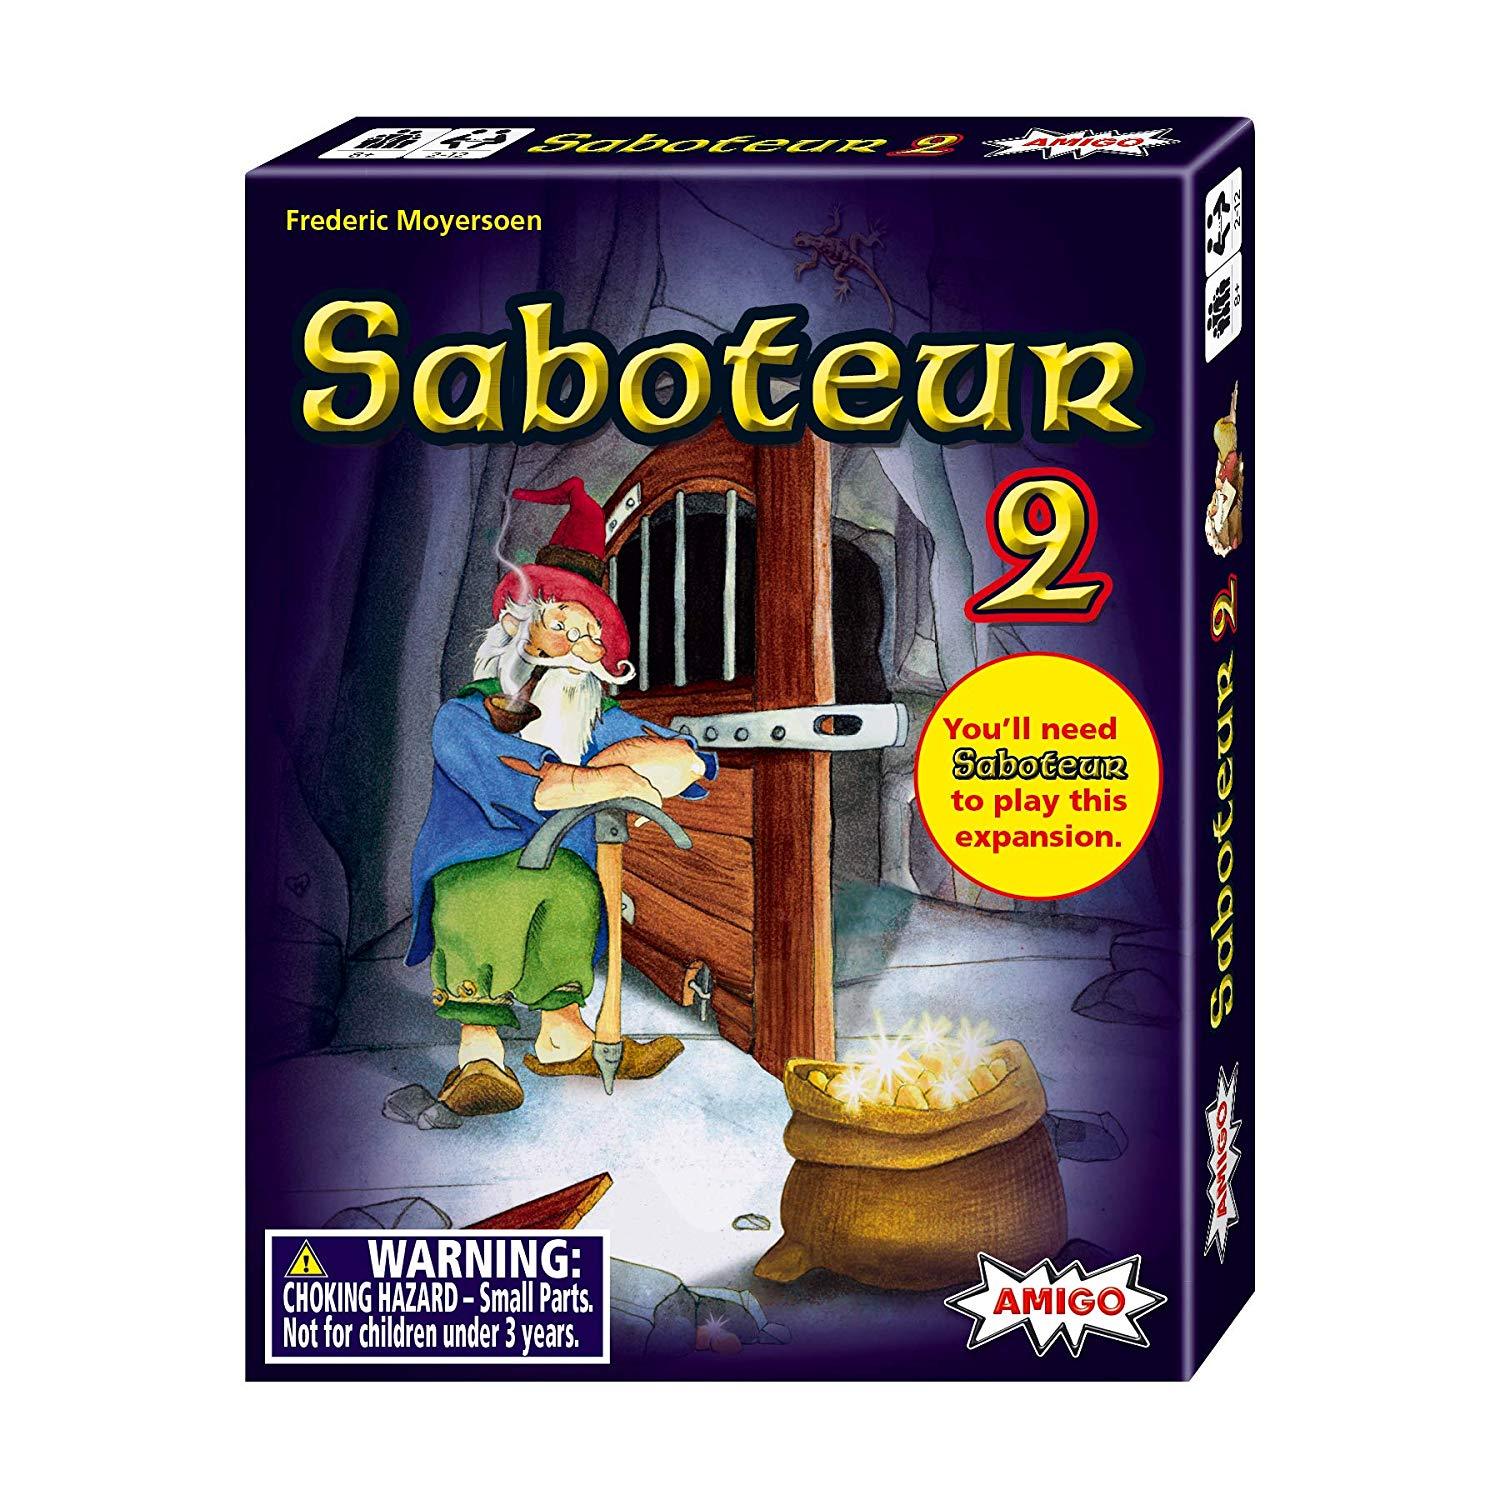 Saboteur 2 | All About Games